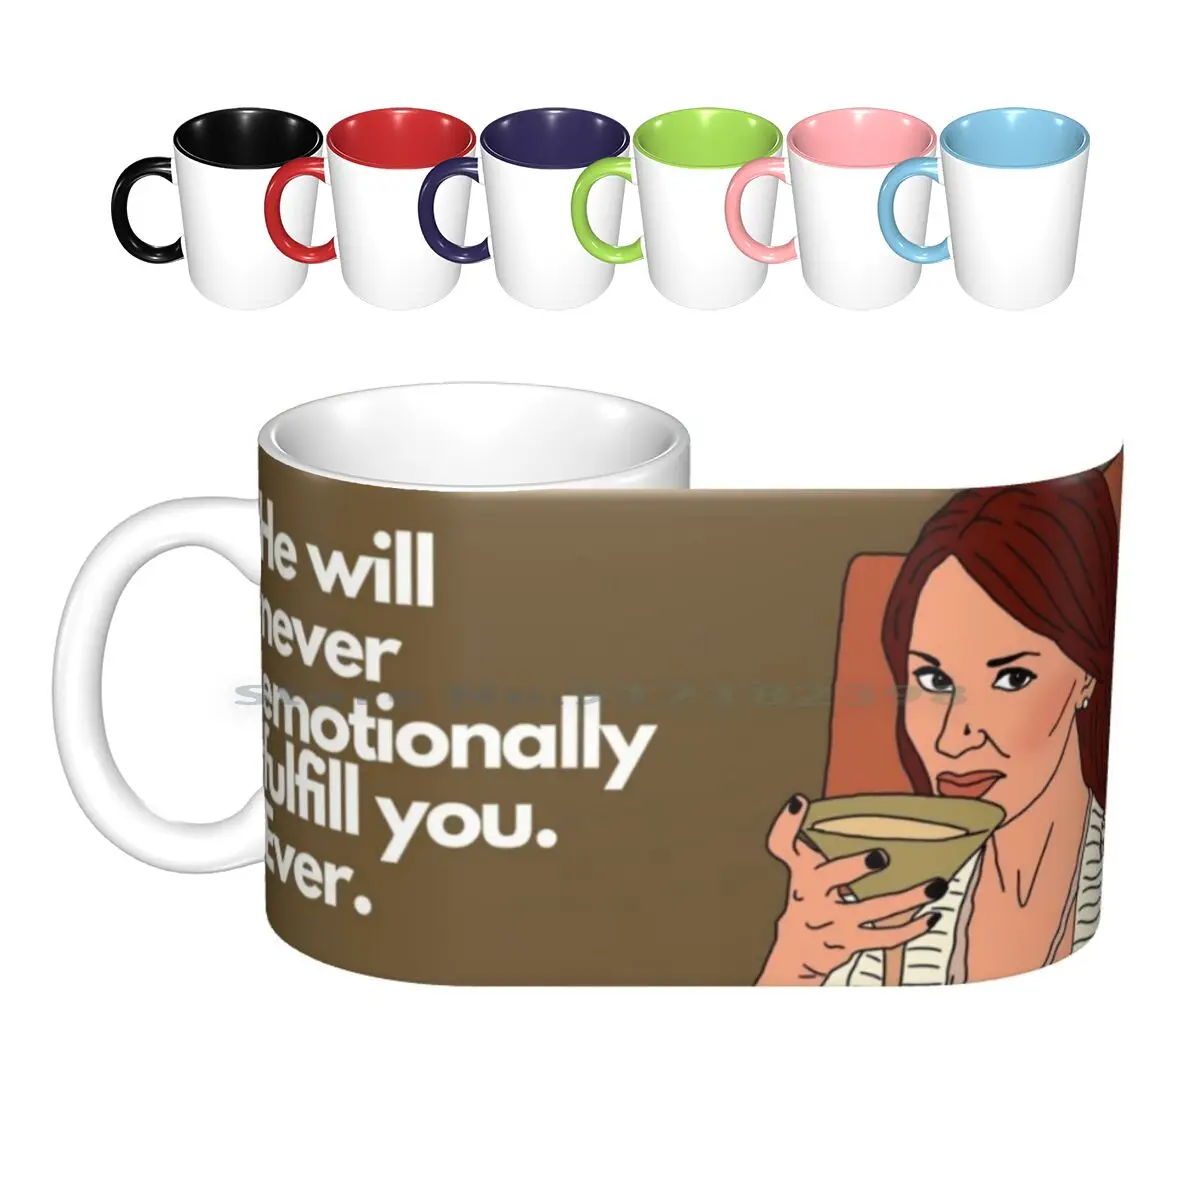 

He Will Never Emotionally Fulfill You Ever-Rhobh-Allison Real Housewives Of Beverly Hills Ceramic Mugs Coffee Cups Milk Tea Mug